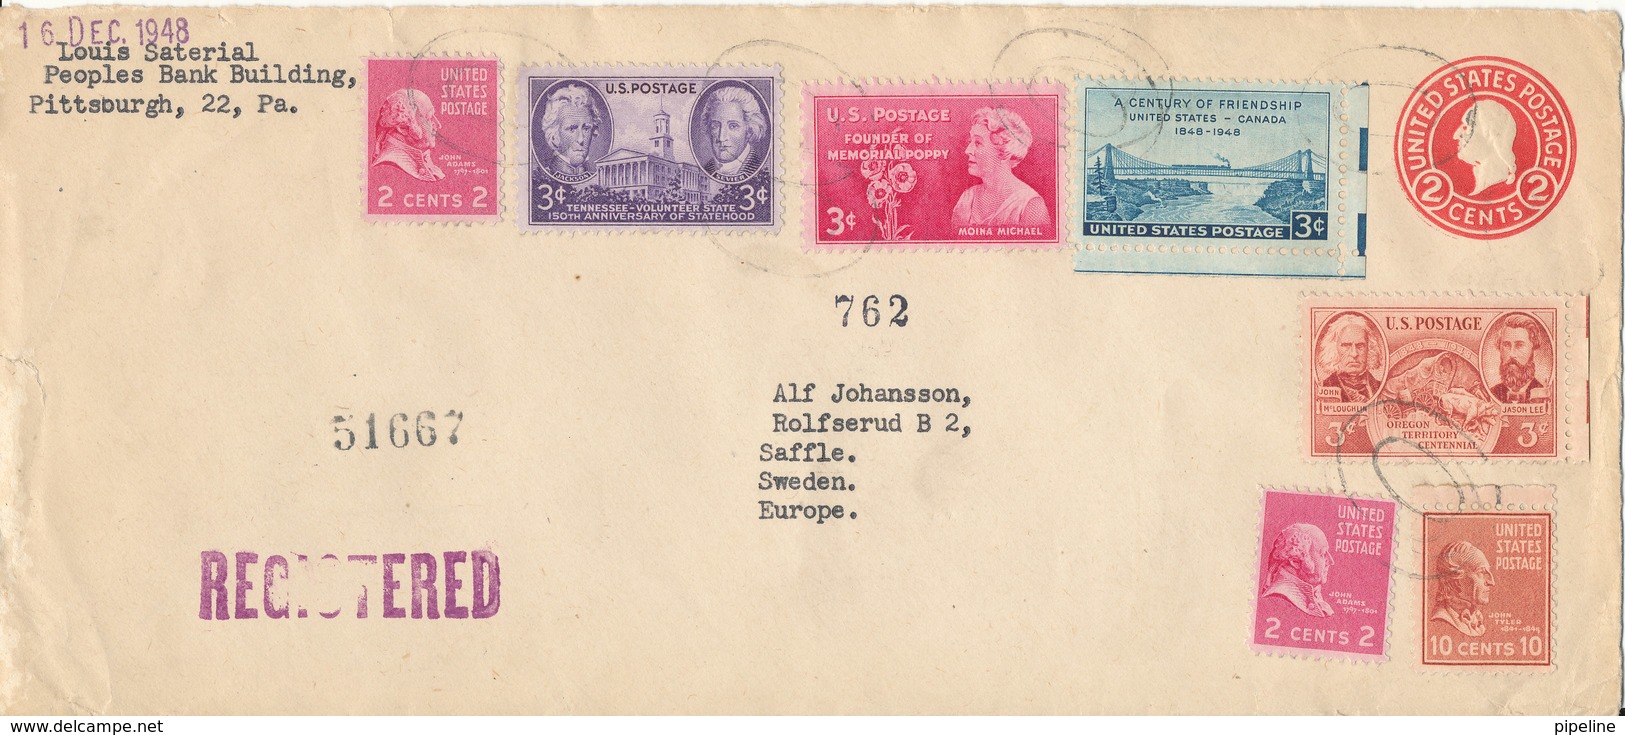 USA Registered Uprated Postal Stationery Cover Sent To Sweden New York 3-12-1948 With More Topic Stamps - 1941-60